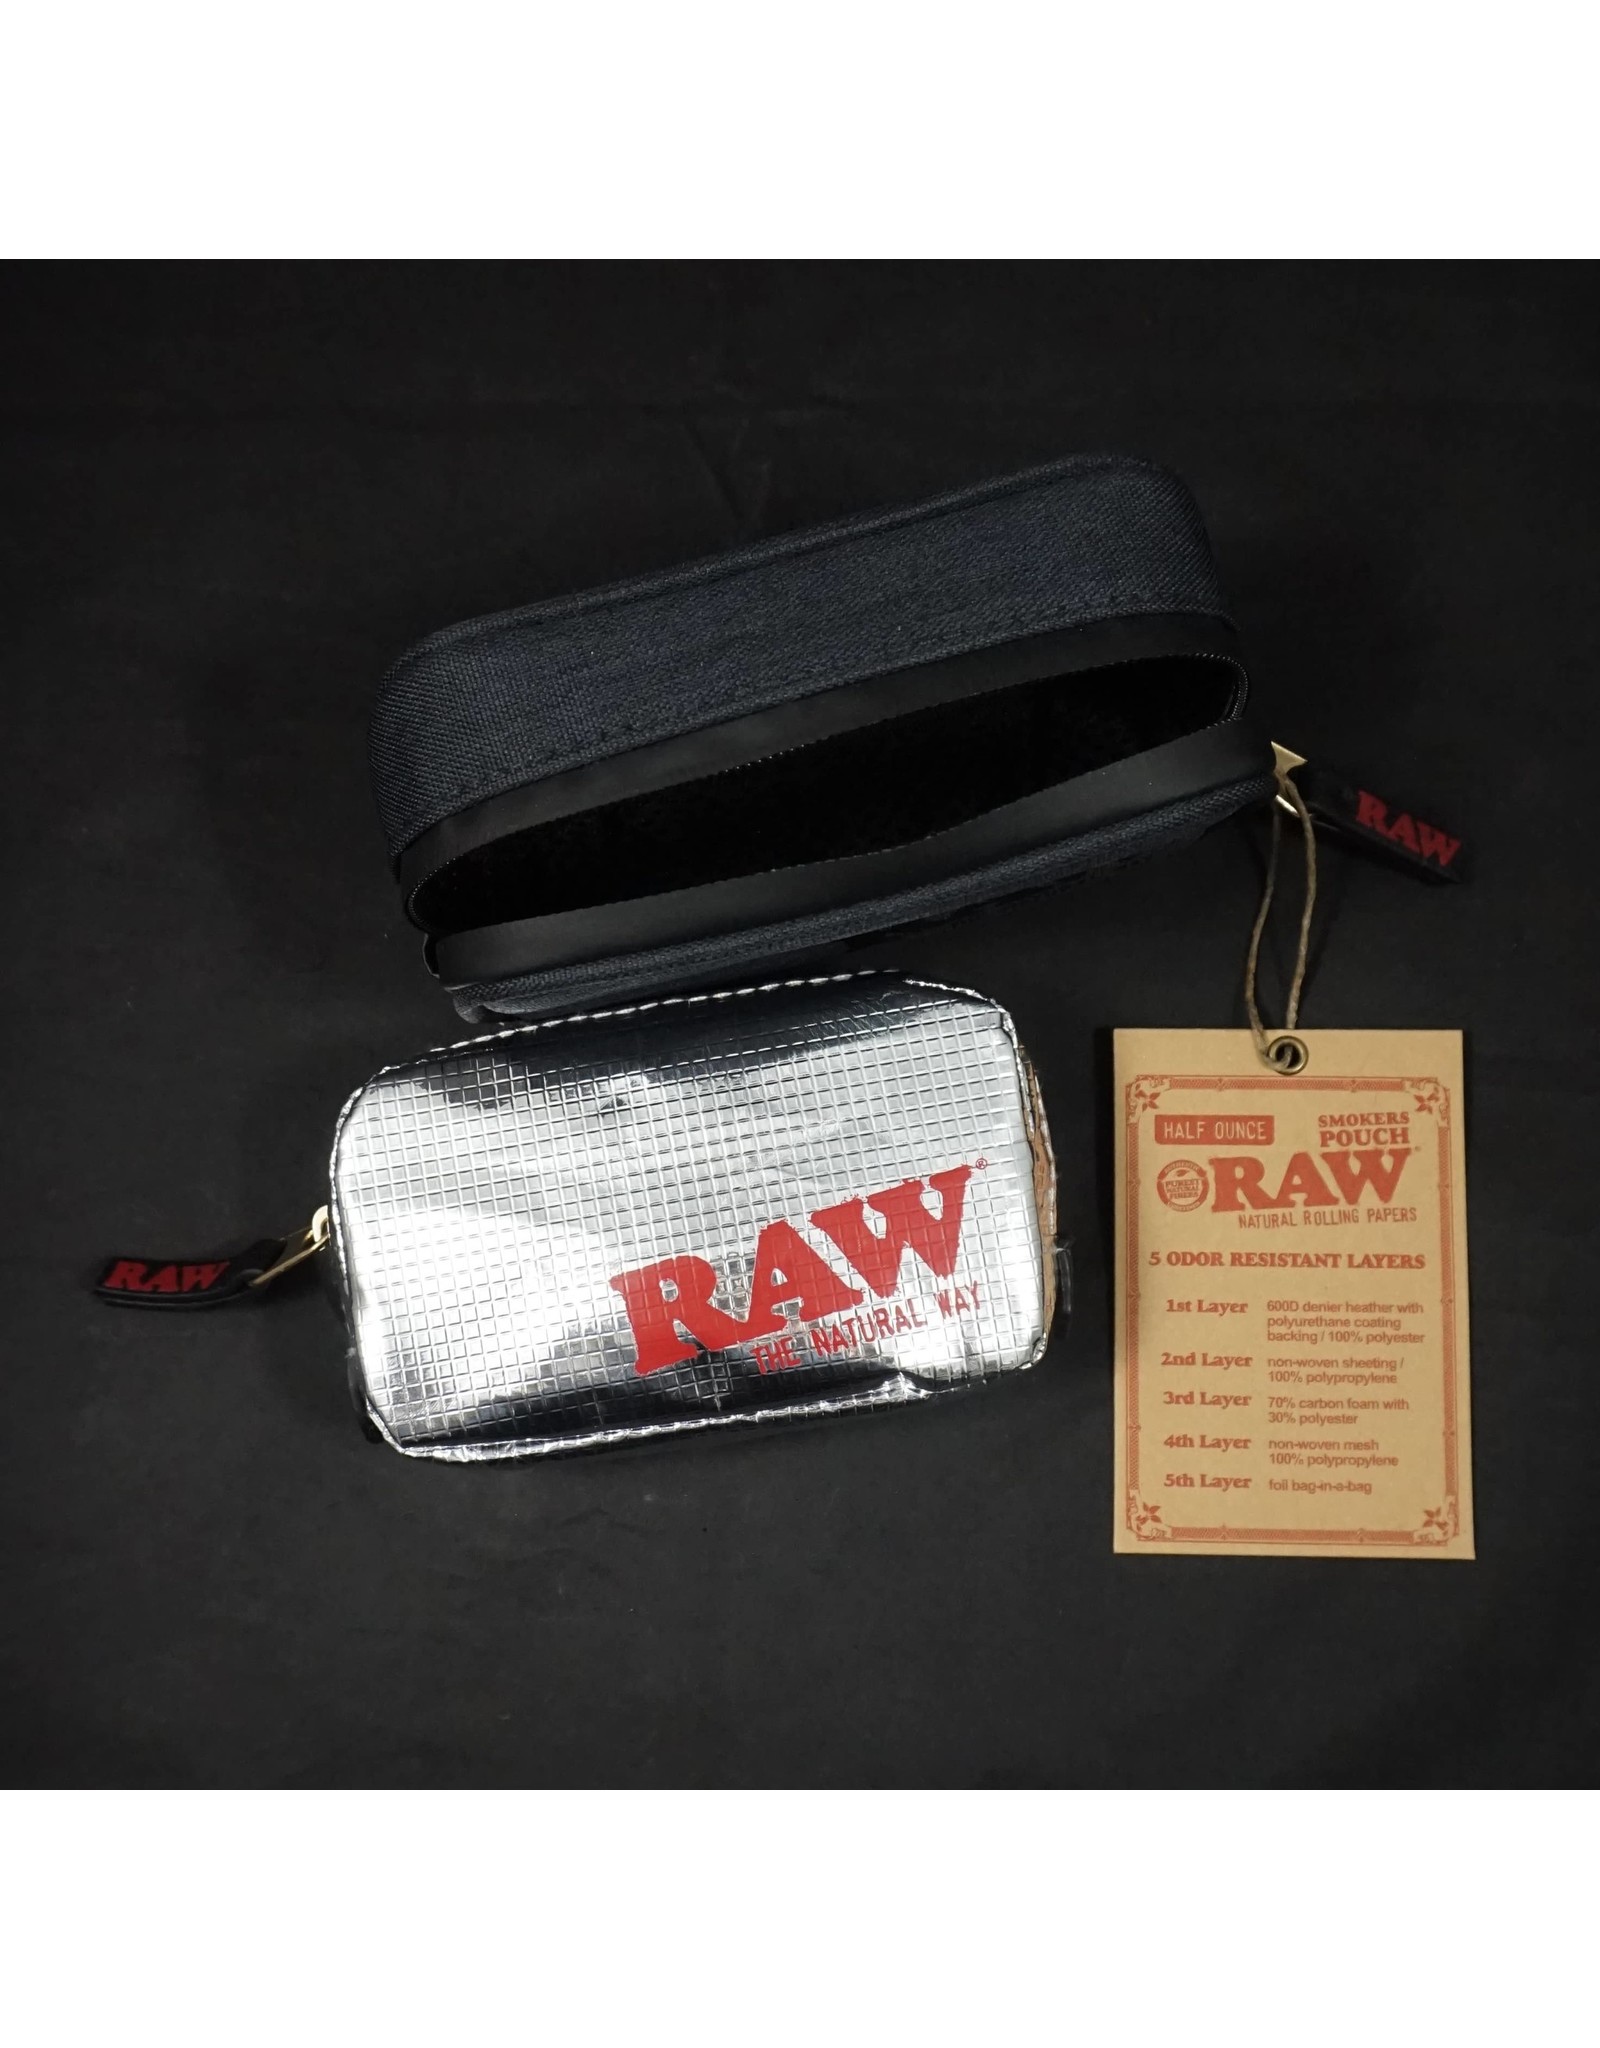 Raw Black Smell Proof Smokers Pouch - Small (Half Ounce)